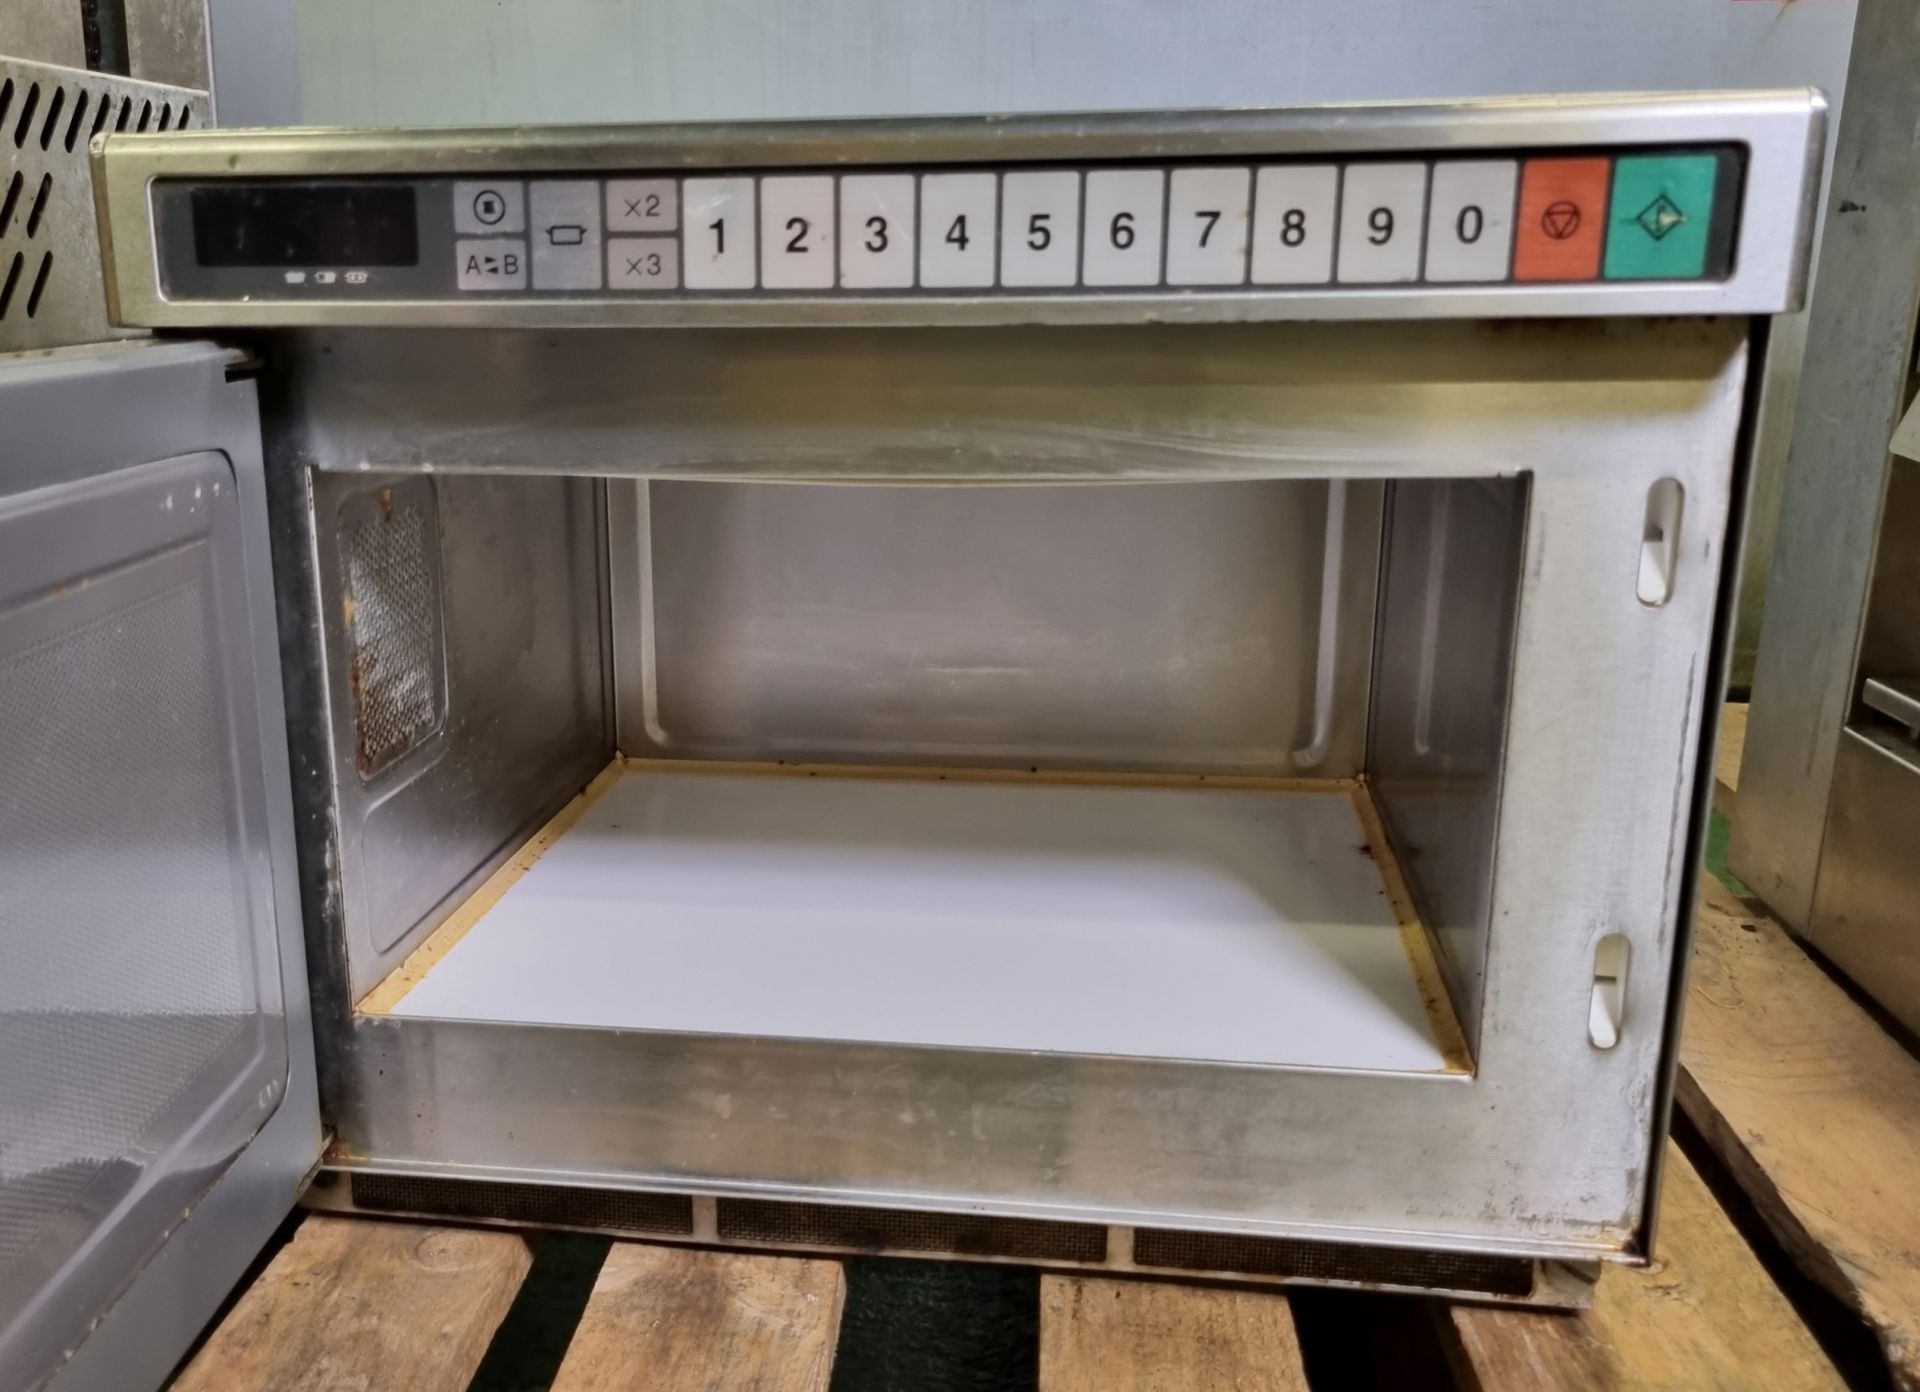 Commercial microwave oven - W 420 x D 540 x H 340mm - Image 3 of 3